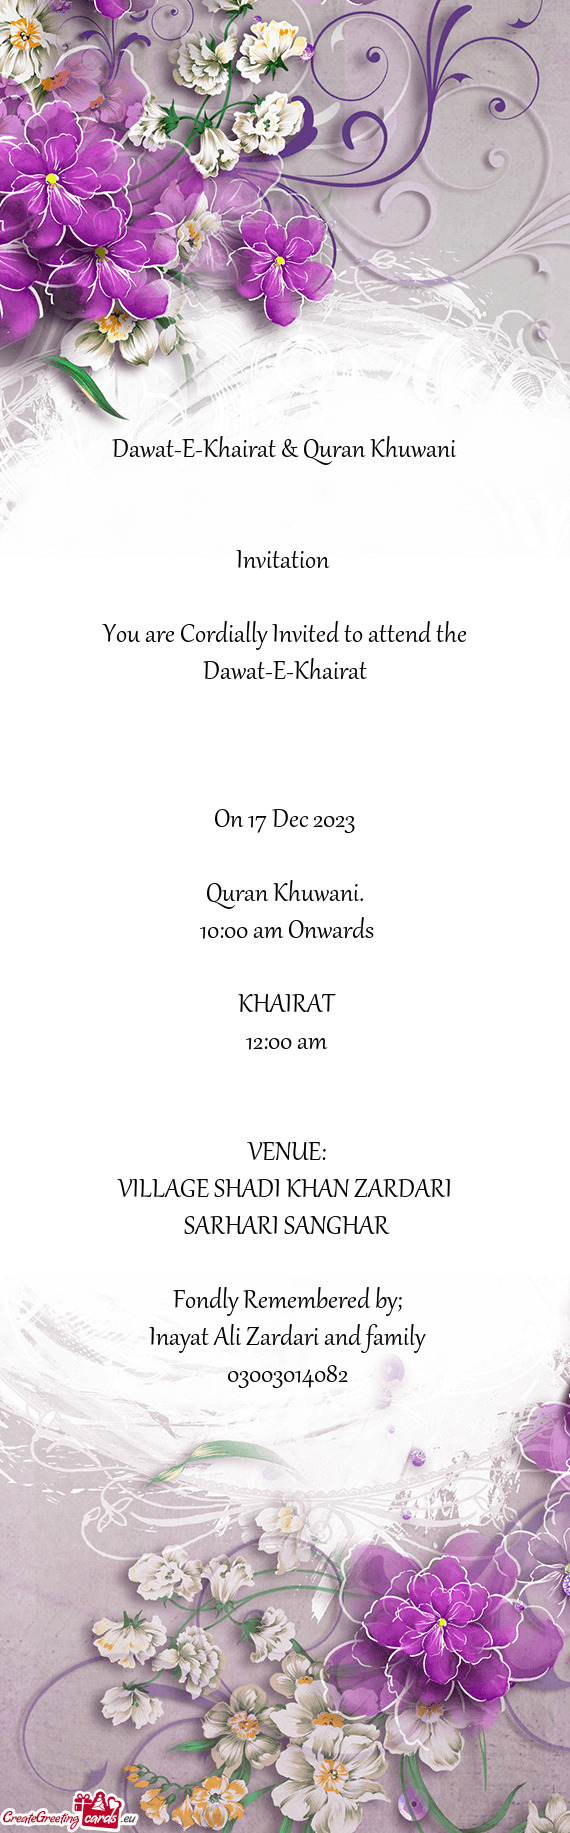 You are Cordially Invited to attend the Dawat-E-Khairat